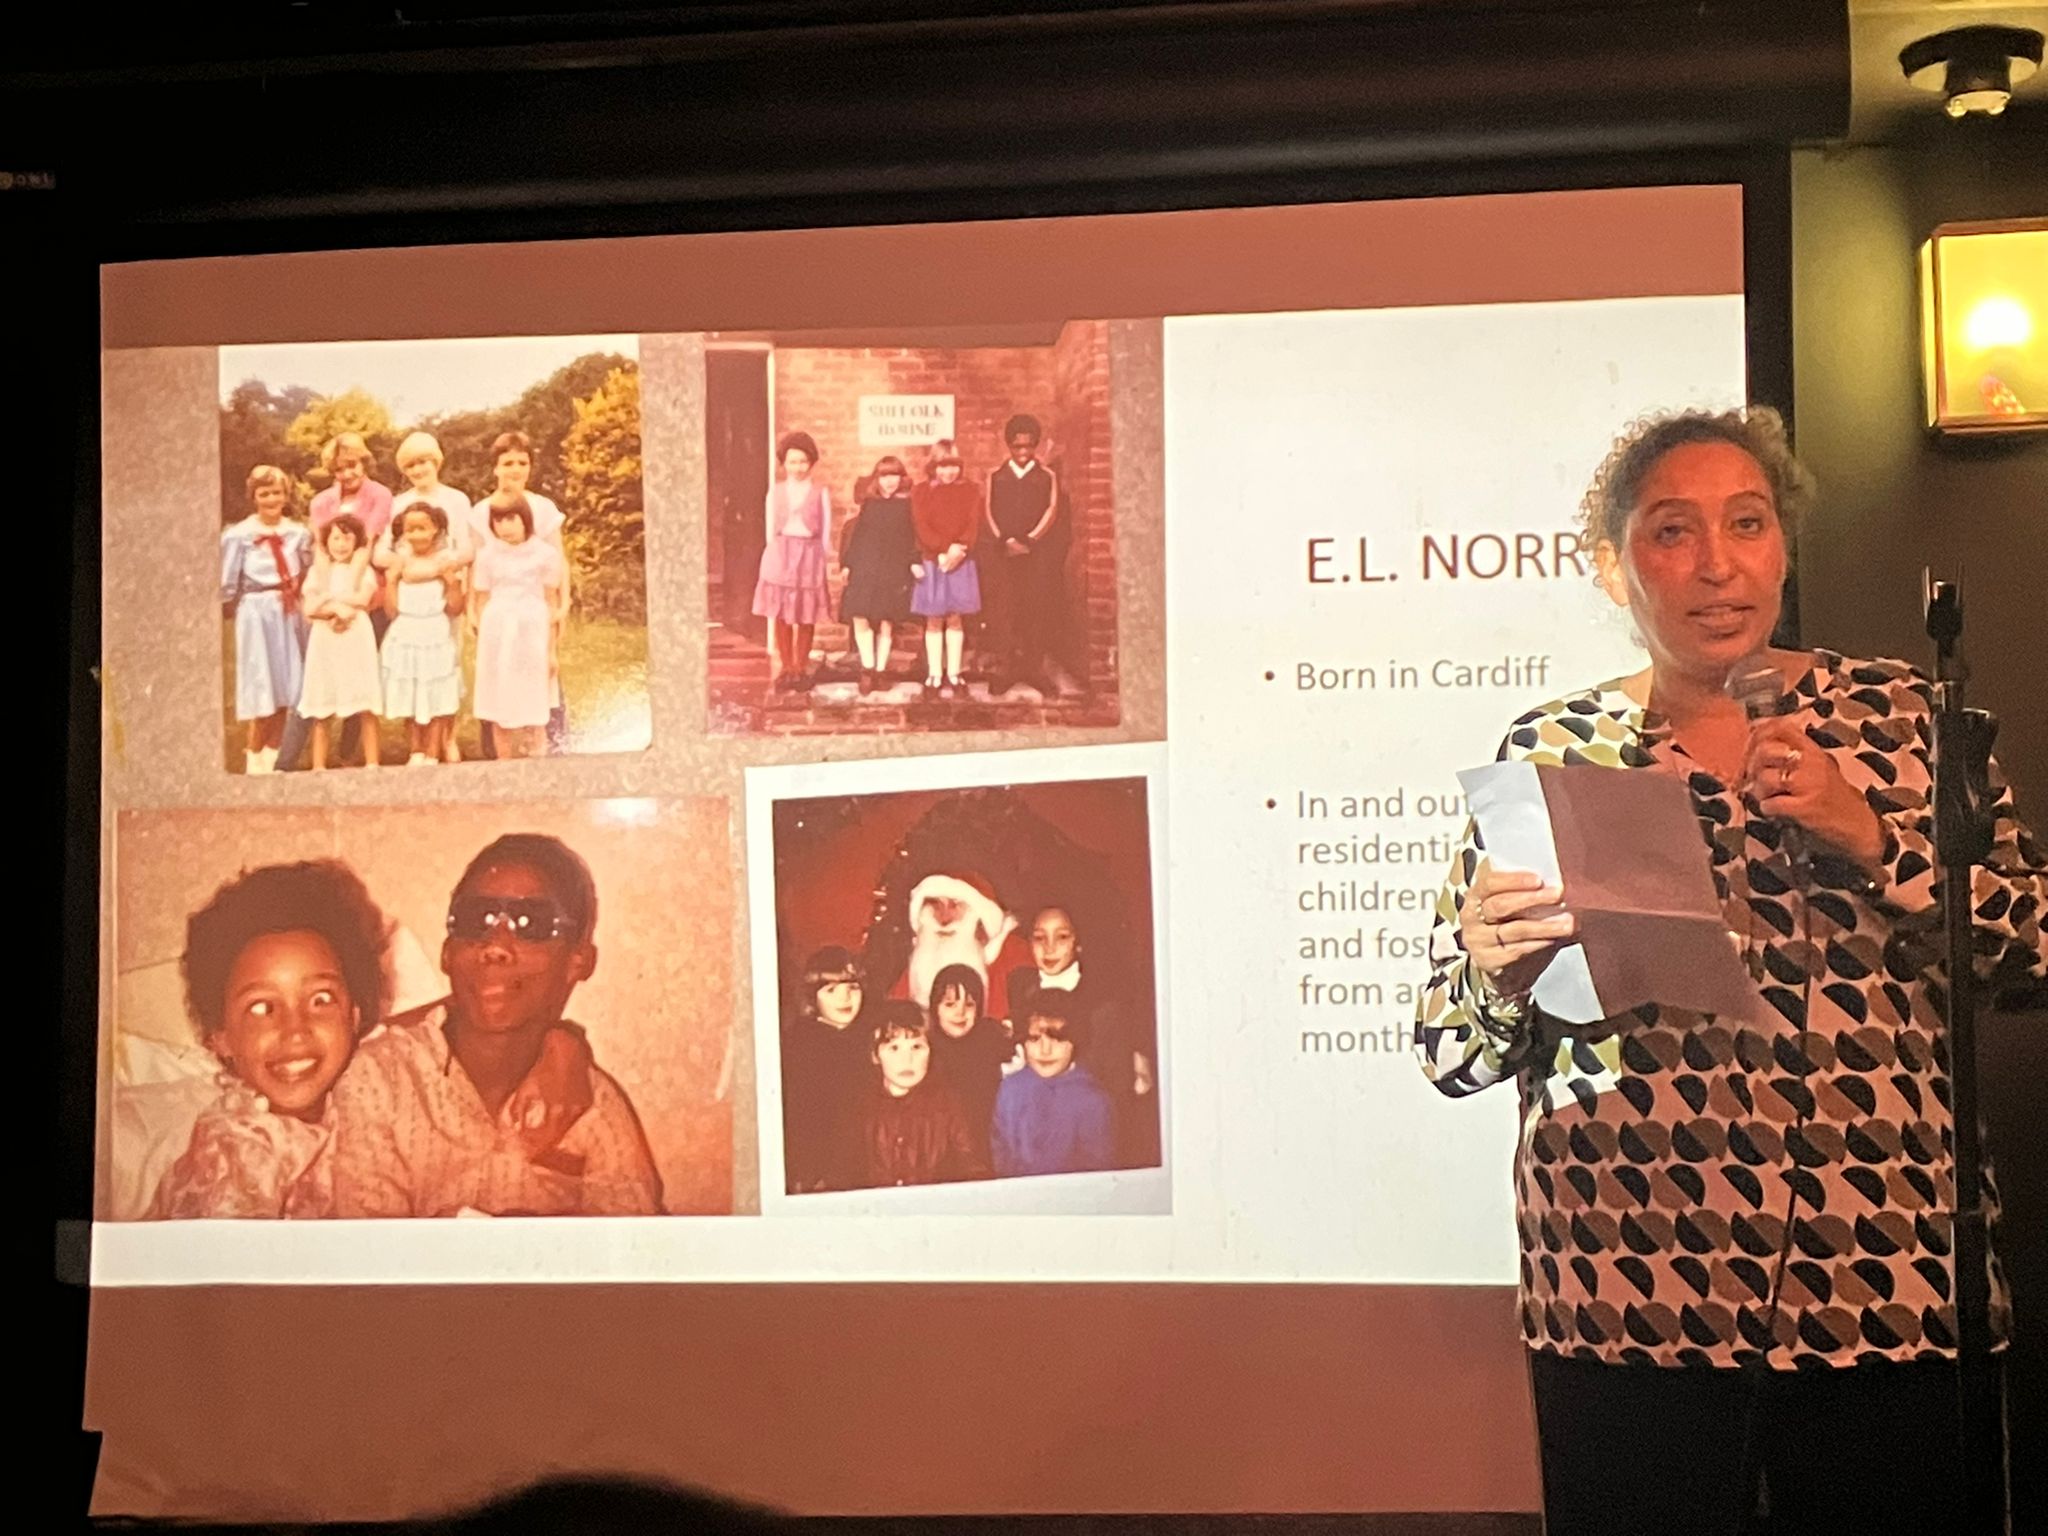 E.L.Norry presenting in front of a Powerpoint presentation slide showing pictures of her childhood